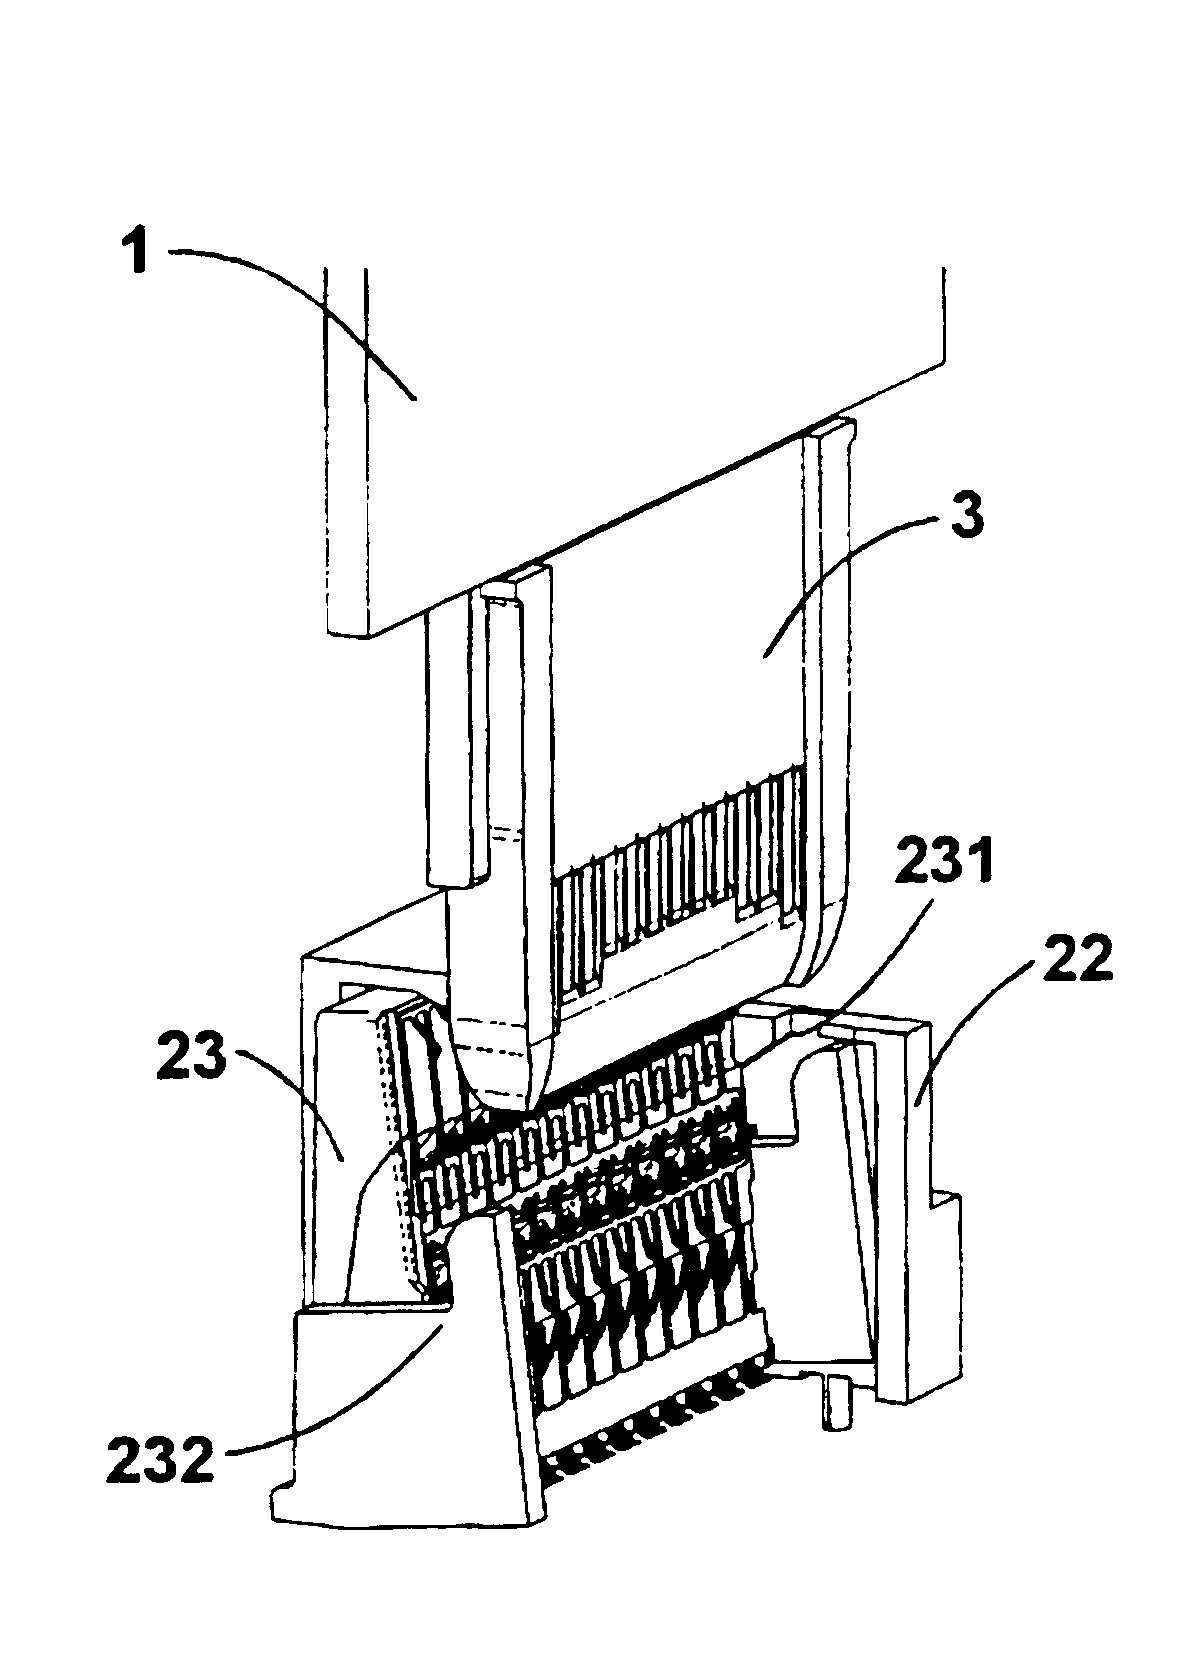 Printed circuit board and connector assembly